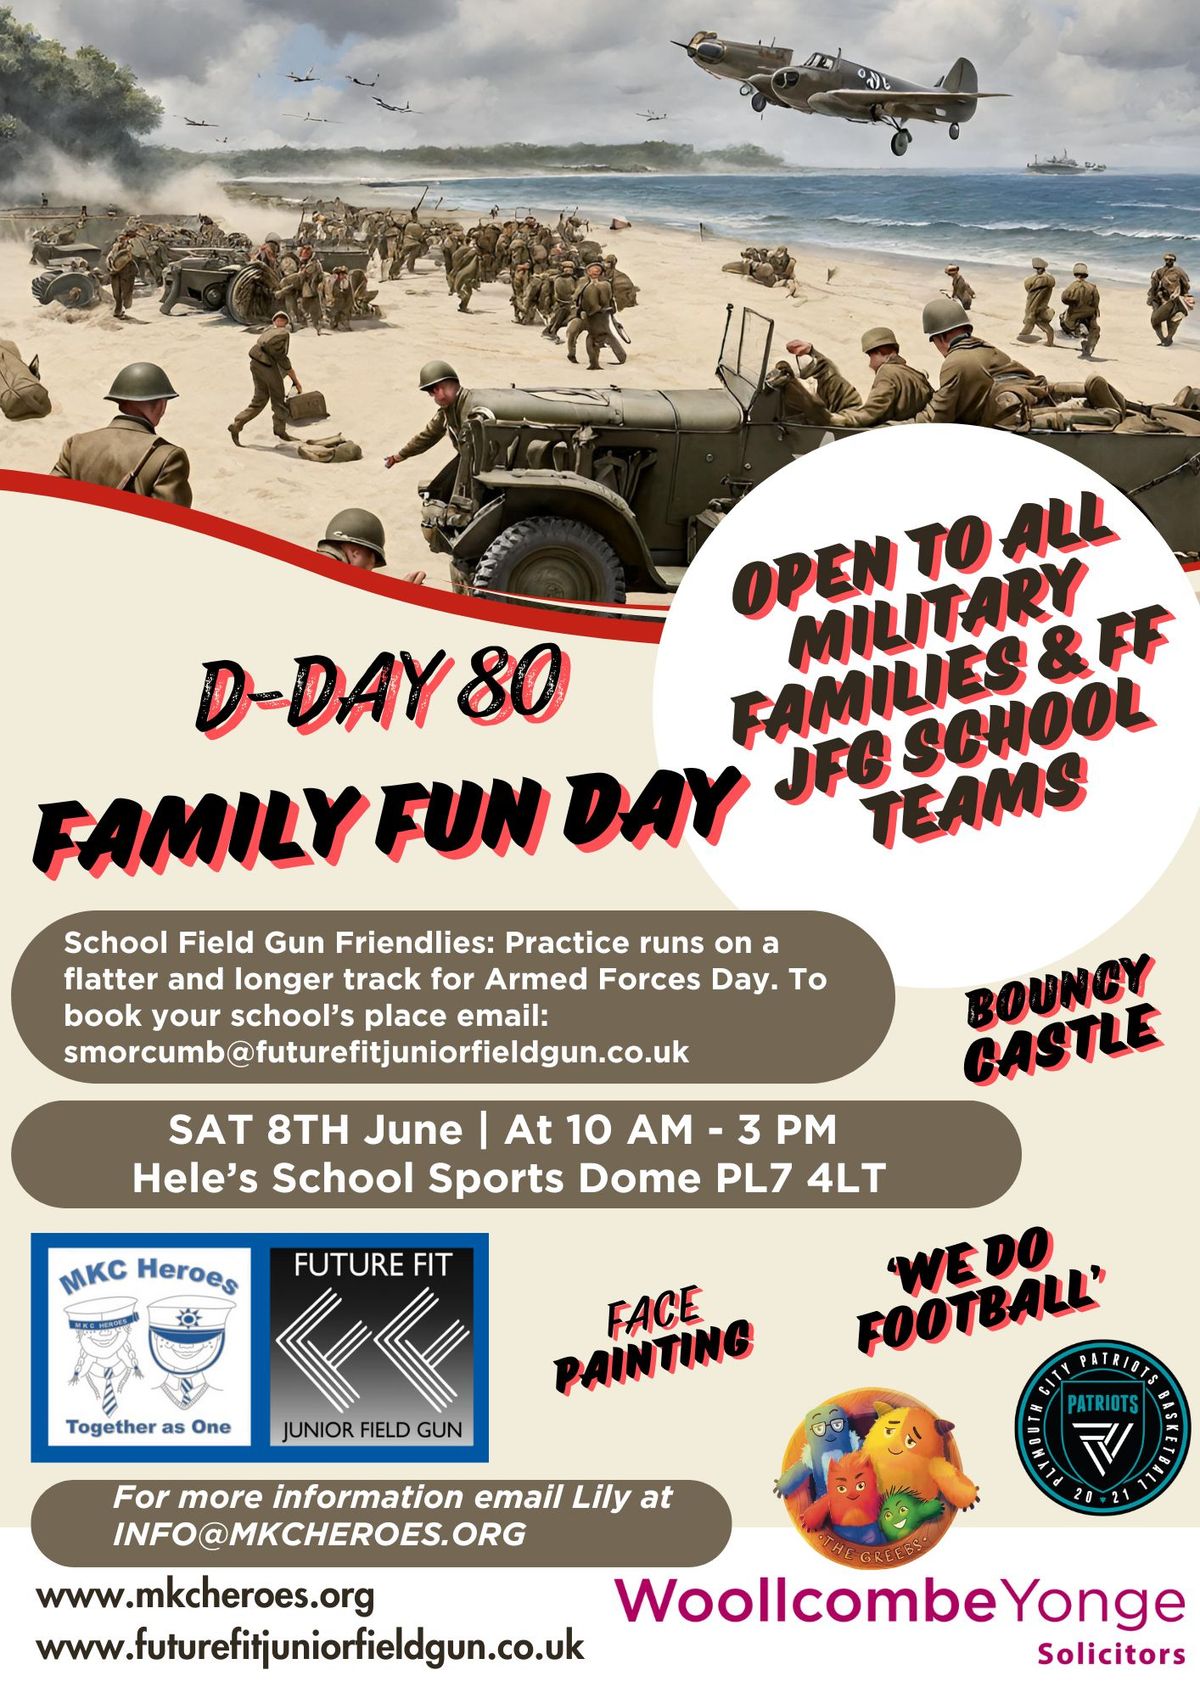 D-Day 80 Military Family Fun Day